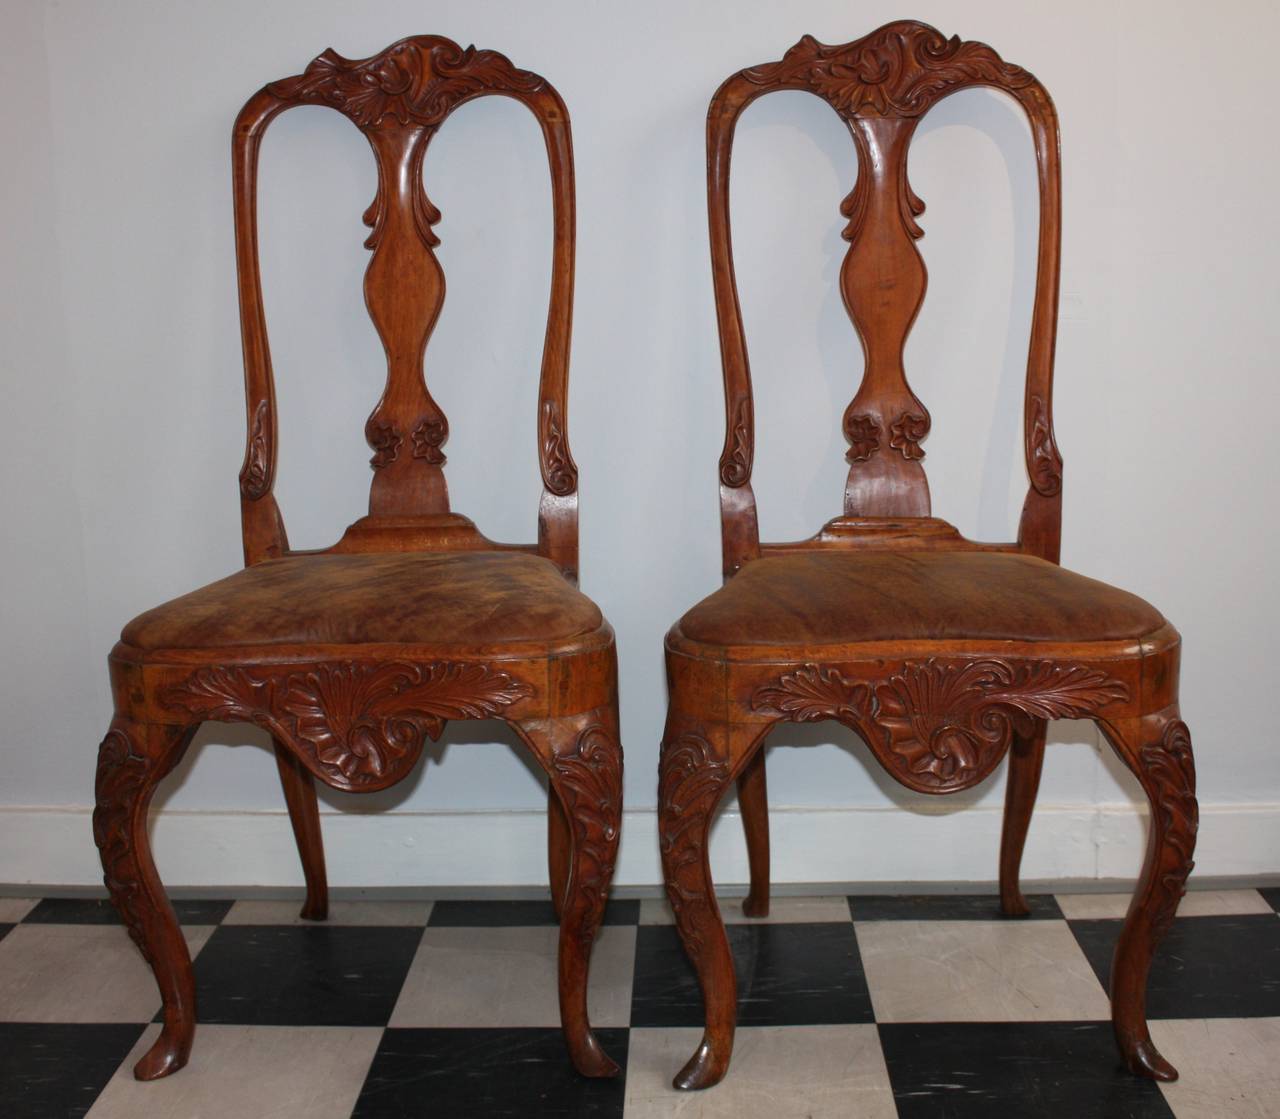 Very nice pair of Rococo chairs, newly upholstered in leather with a vintage look. Could be bought together with another pair of Rococo chairs in same color wood and leather, just a little different in the carving. Are shown on this site.